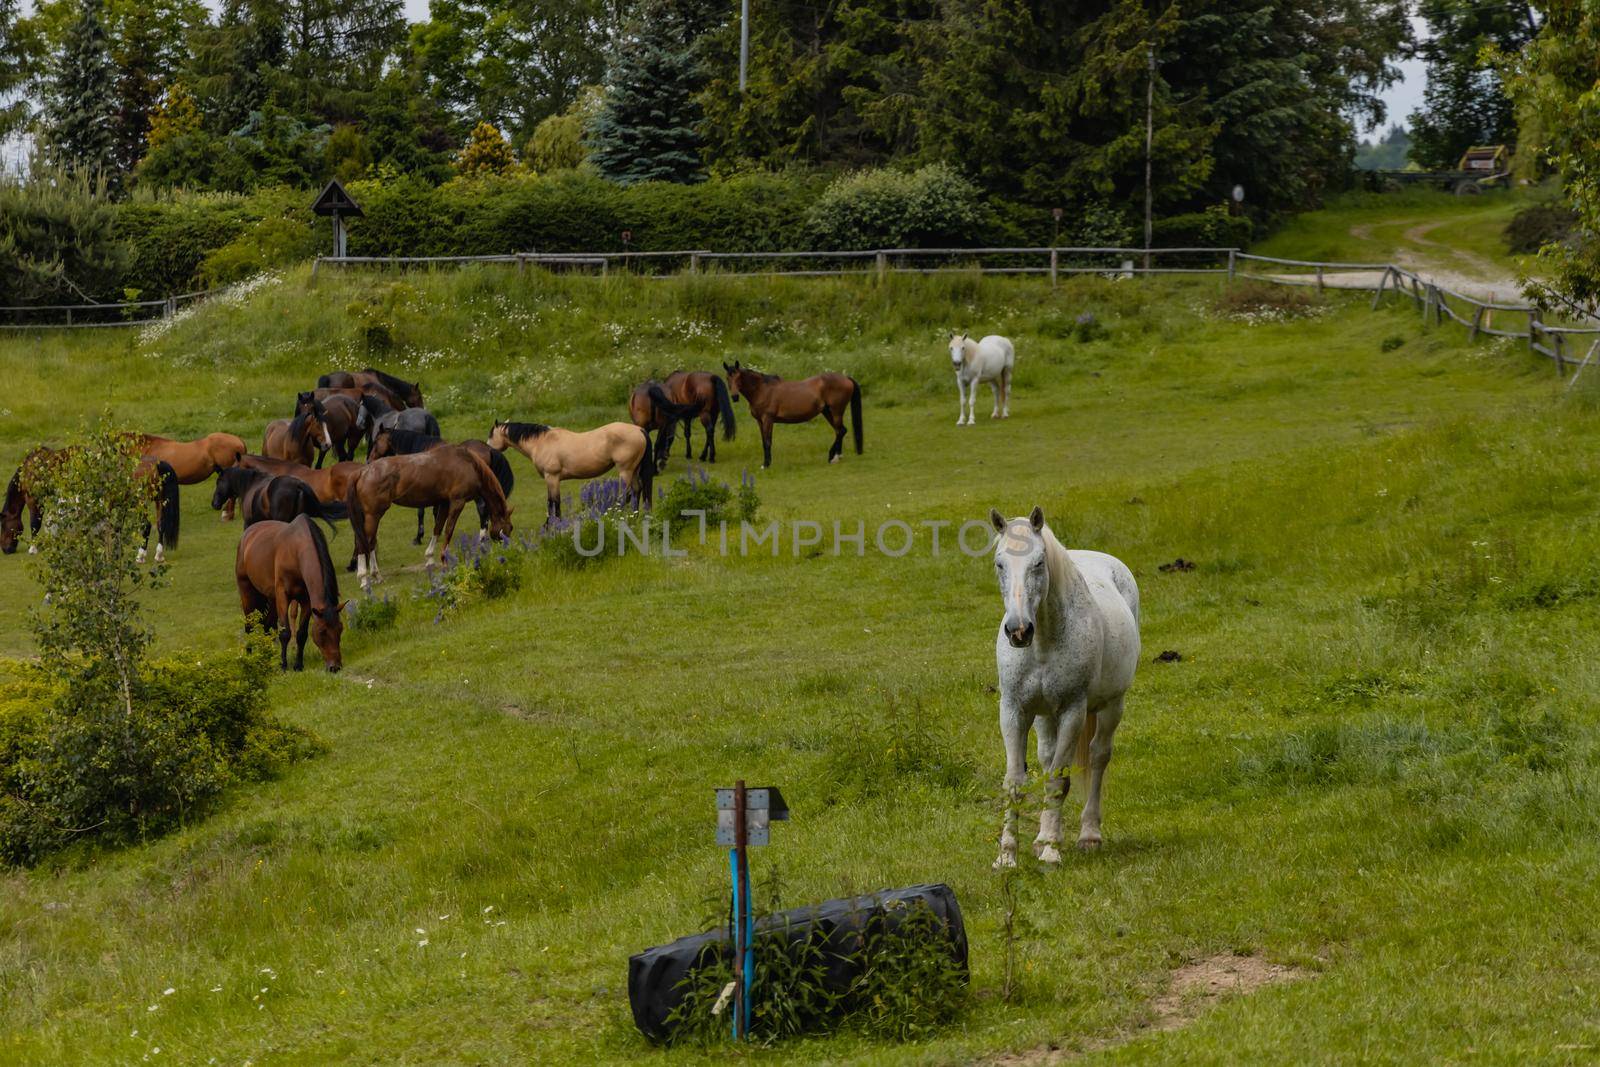 Herd of horses on horse farm with two white and few brown horses